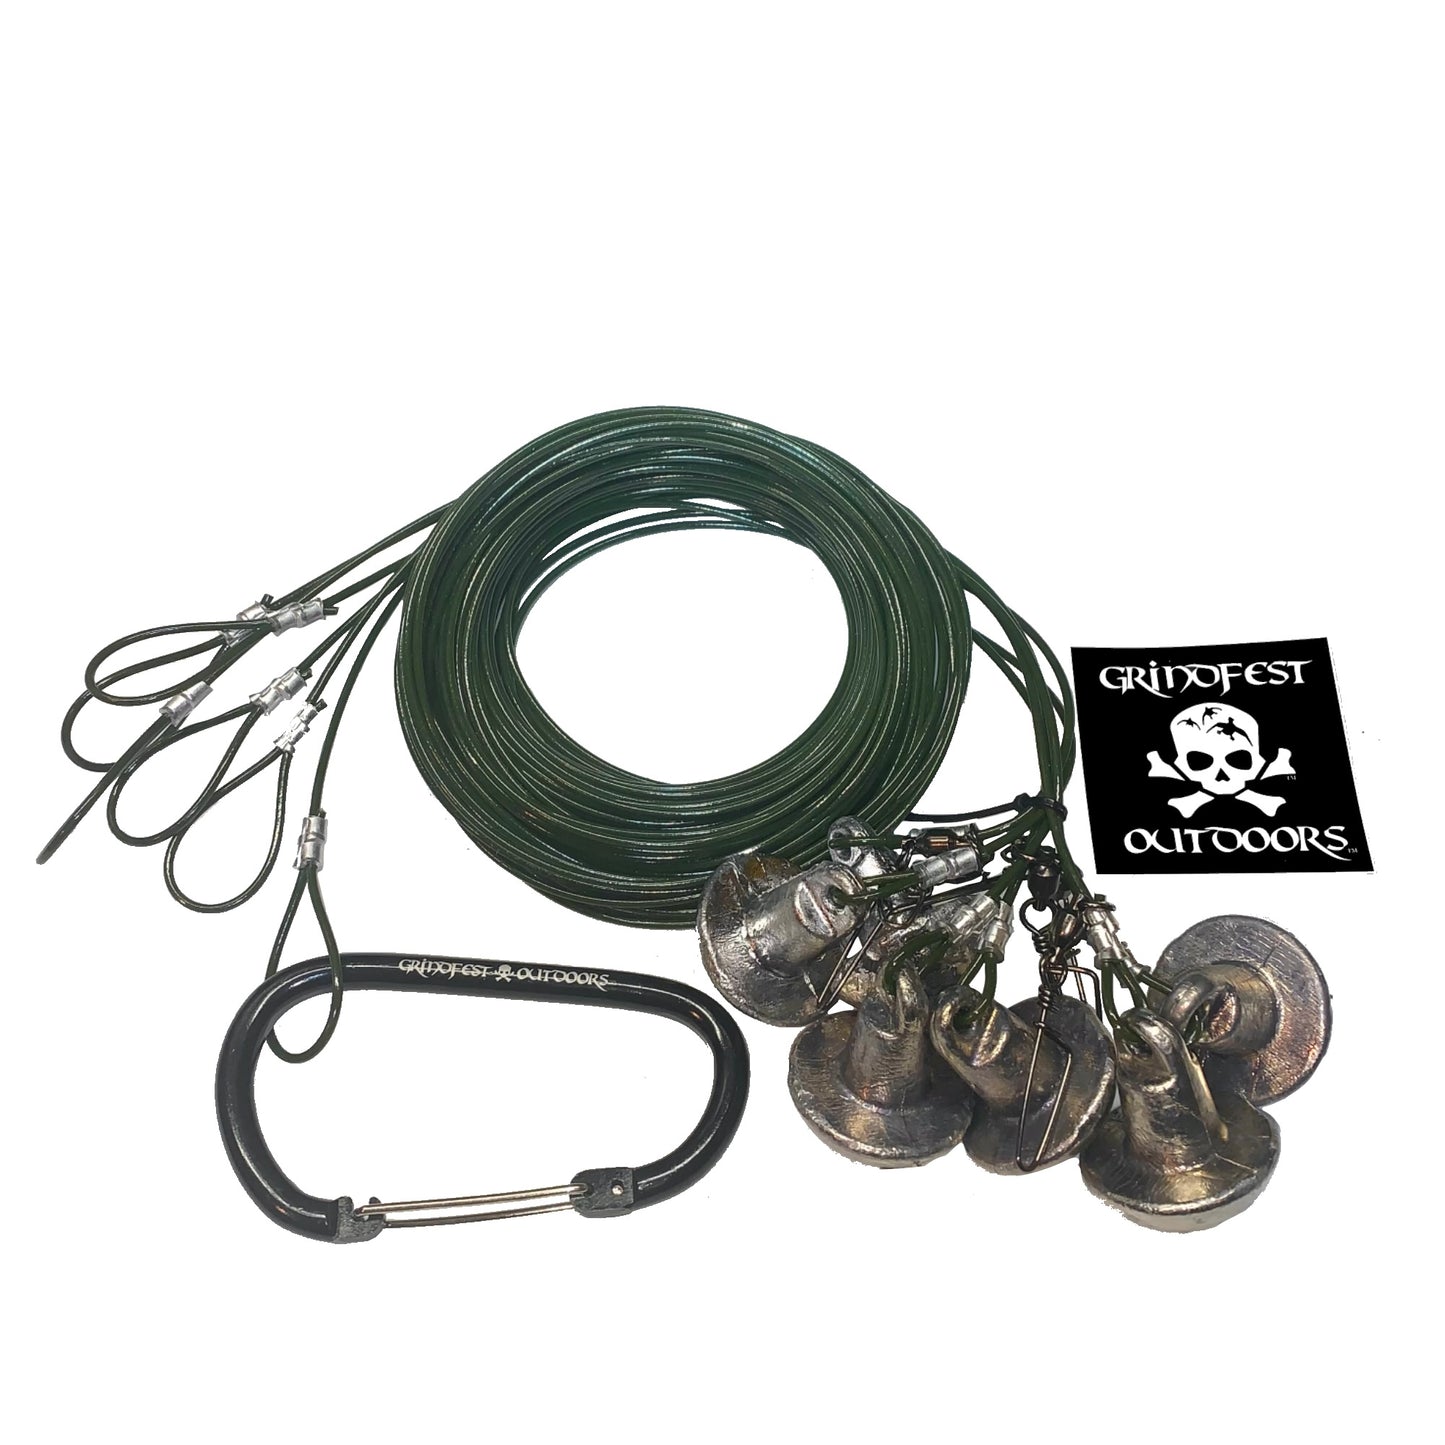 12oz Coated Steel Cable Texas Rigs